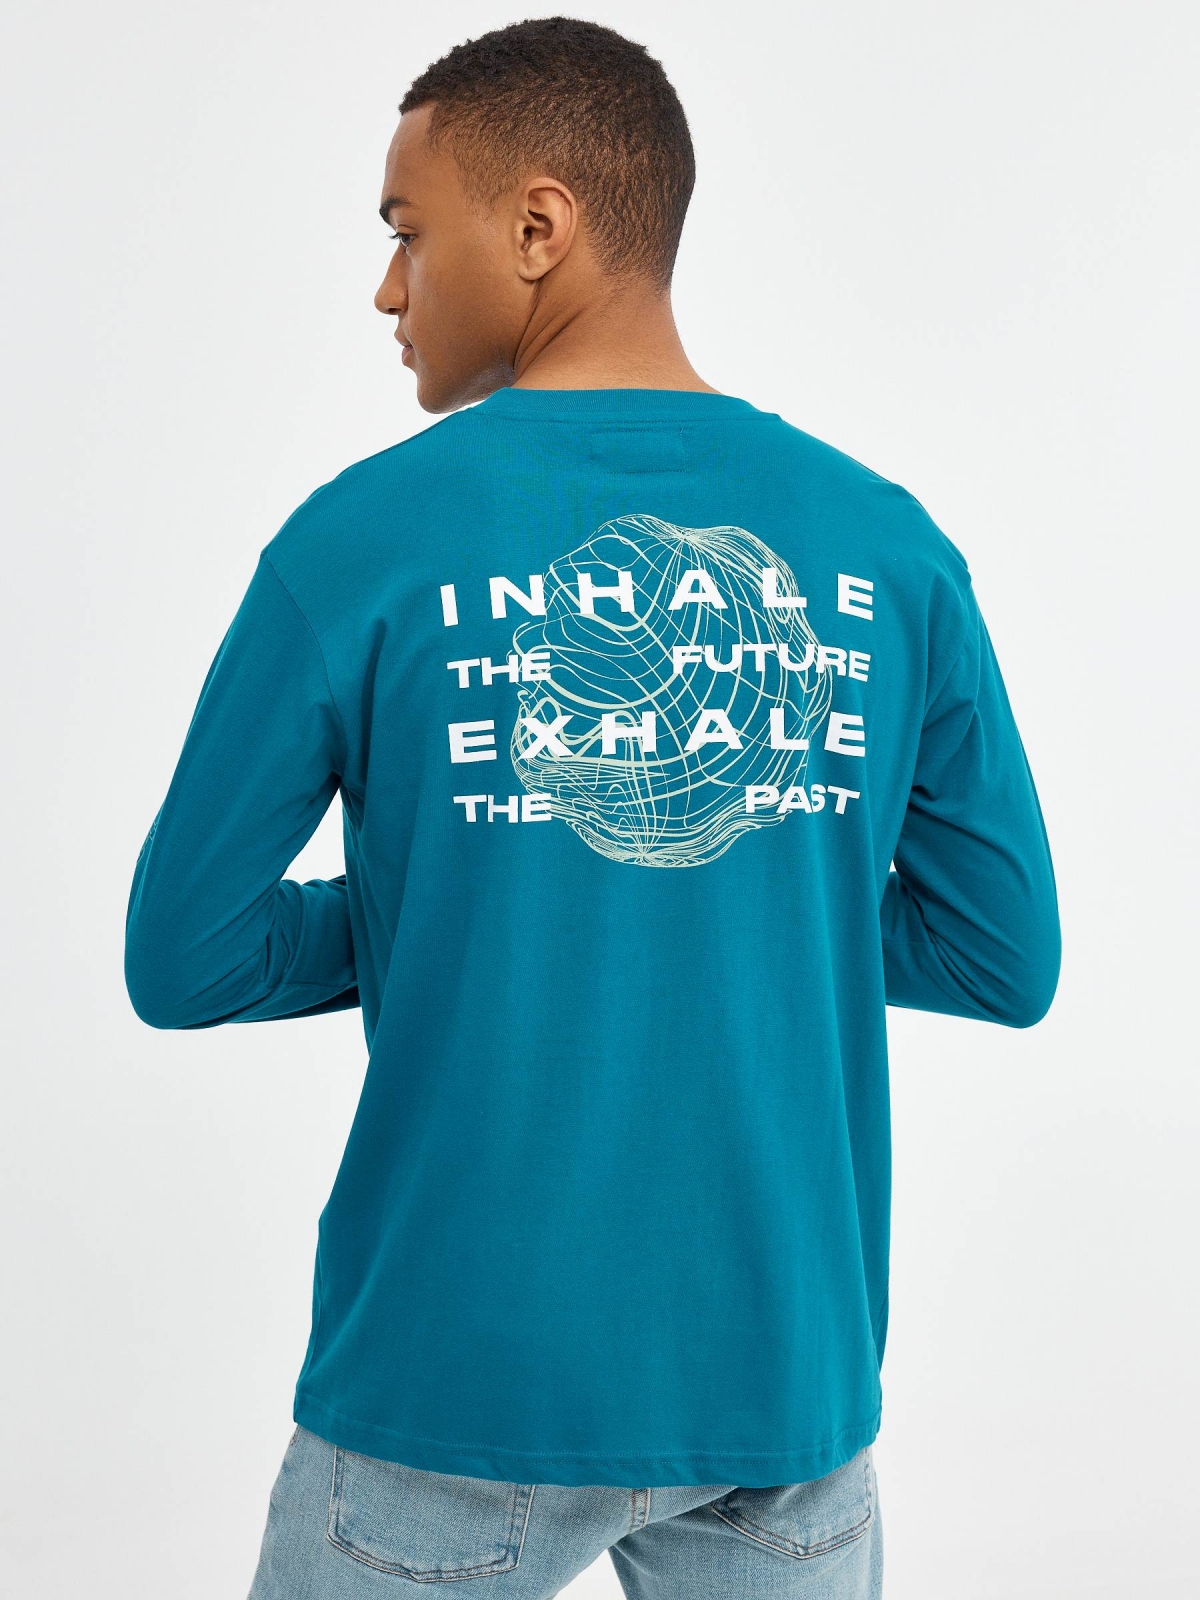 INHALE T-shirt turquoise middle back view